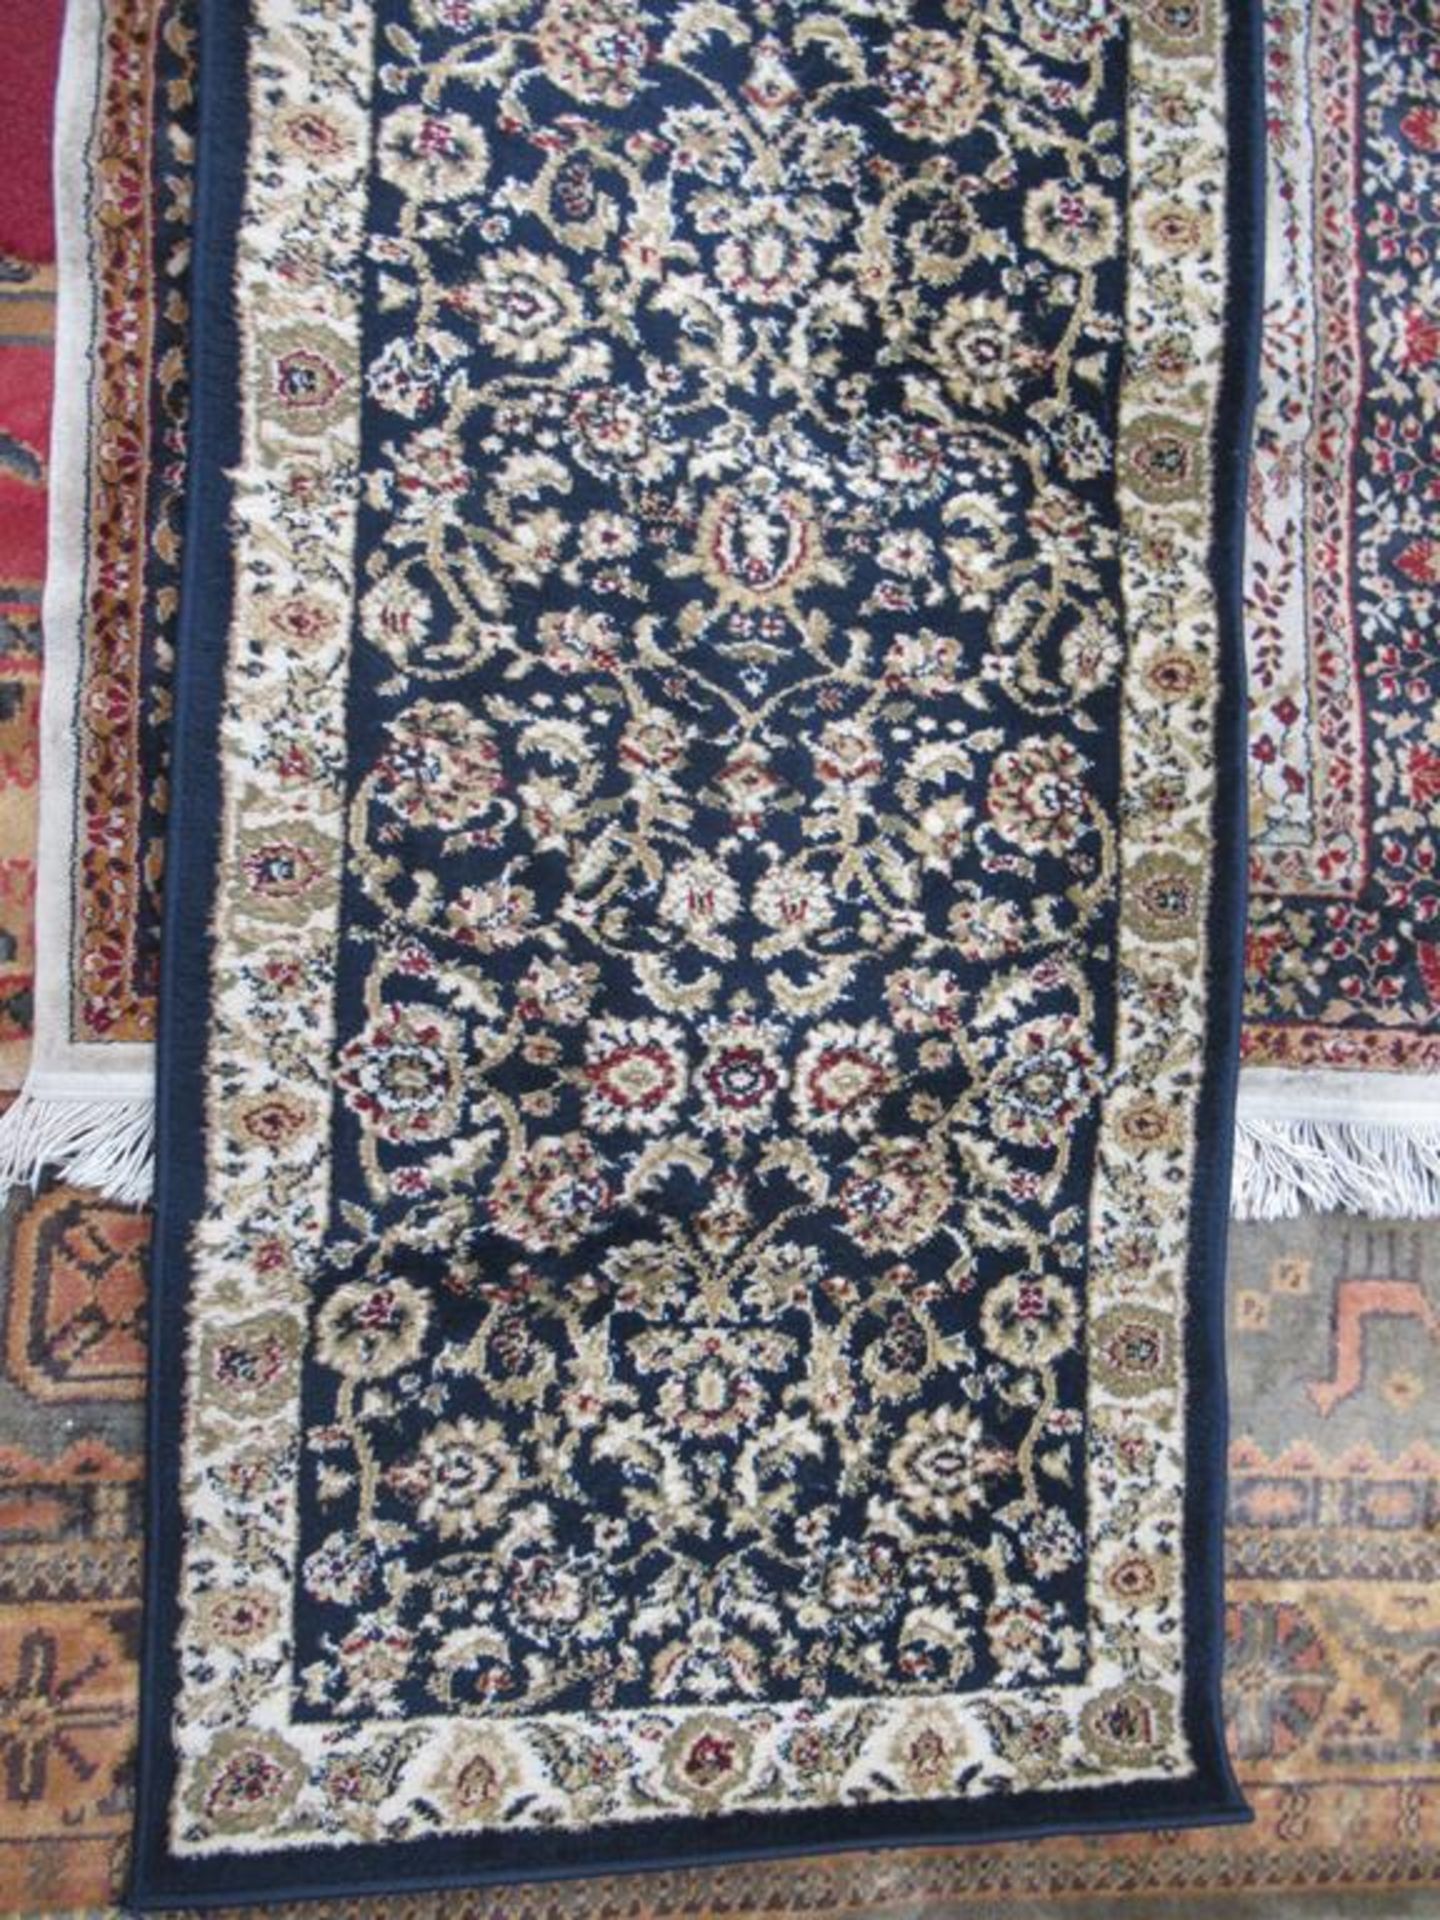 Reproduction Bokhara Rug (size 135cm x 97cm) and Tabriz Navy Rug (size 67cm x 230cm) - Image 3 of 4